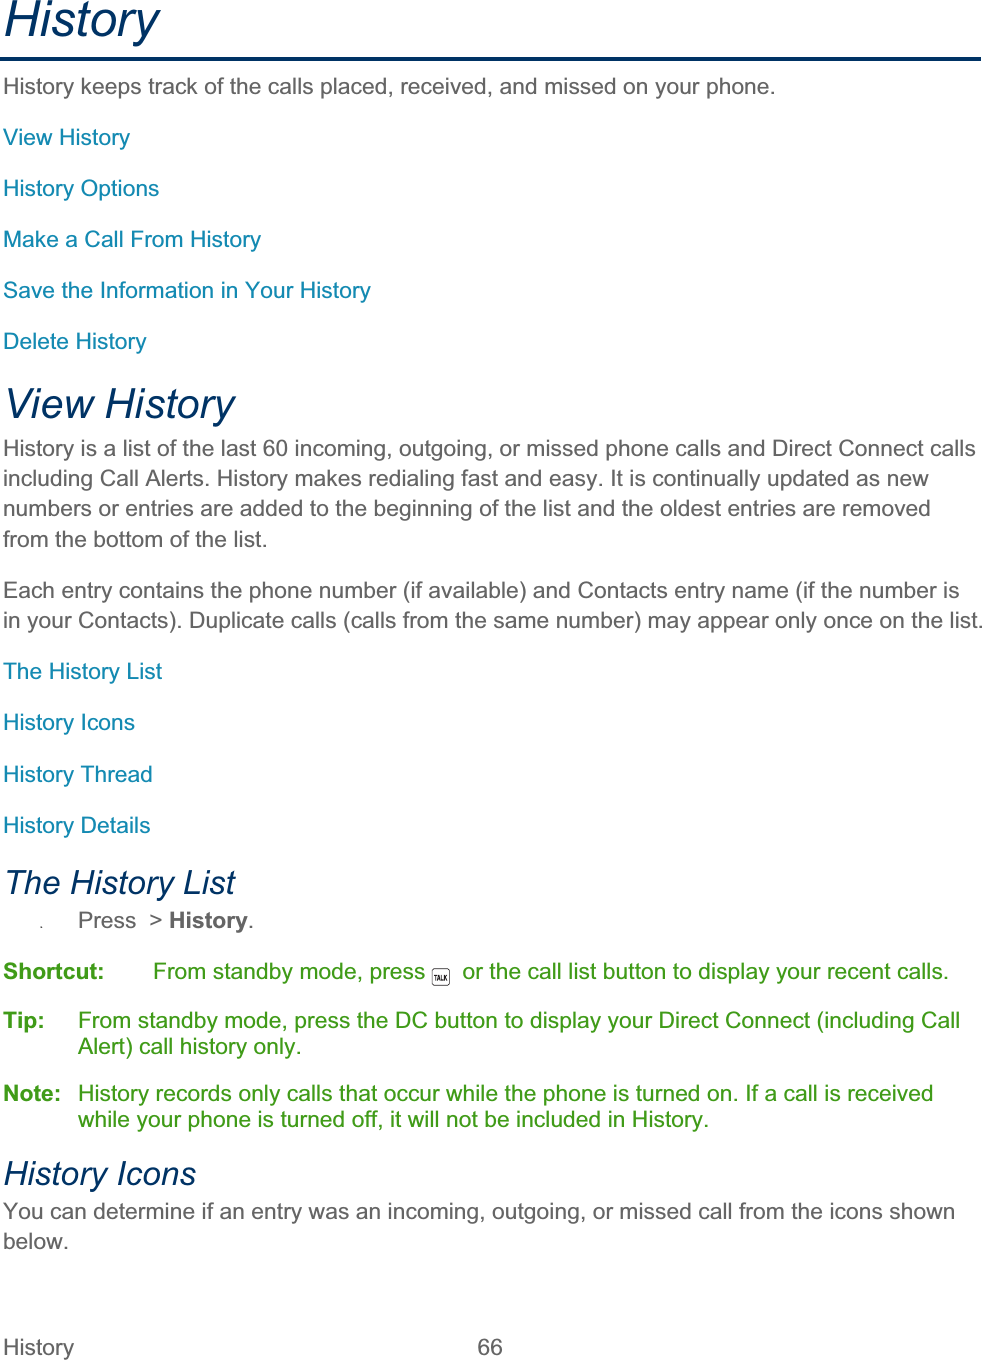 History   66   HistoryHistory keeps track of the calls placed, received, and missed on your phone. View History History Options Make a Call From History Save the Information in Your History Delete History View History  History is a list of the last 60 incoming, outgoing, or missed phone calls and Direct Connect calls including Call Alerts. History makes redialing fast and easy. It is continually updated as new numbers or entries are added to the beginning of the list and the oldest entries are removed from the bottom of the list. Each entry contains the phone number (if available) and Contacts entry name (if the number is in your Contacts). Duplicate calls (calls from the same number) may appear only once on the list. The History List History Icons History Thread History Details The History List ʇPress  &gt; History.Shortcut:   From standby mode, press    or the call list button to display your recent calls. Tip:  From standby mode, press the DC button to display your Direct Connect (including Call Alert) call history only.Note:  History records only calls that occur while the phone is turned on. If a call is received while your phone is turned off, it will not be included in History. History Icons You can determine if an entry was an incoming, outgoing, or missed call from the icons shown below.